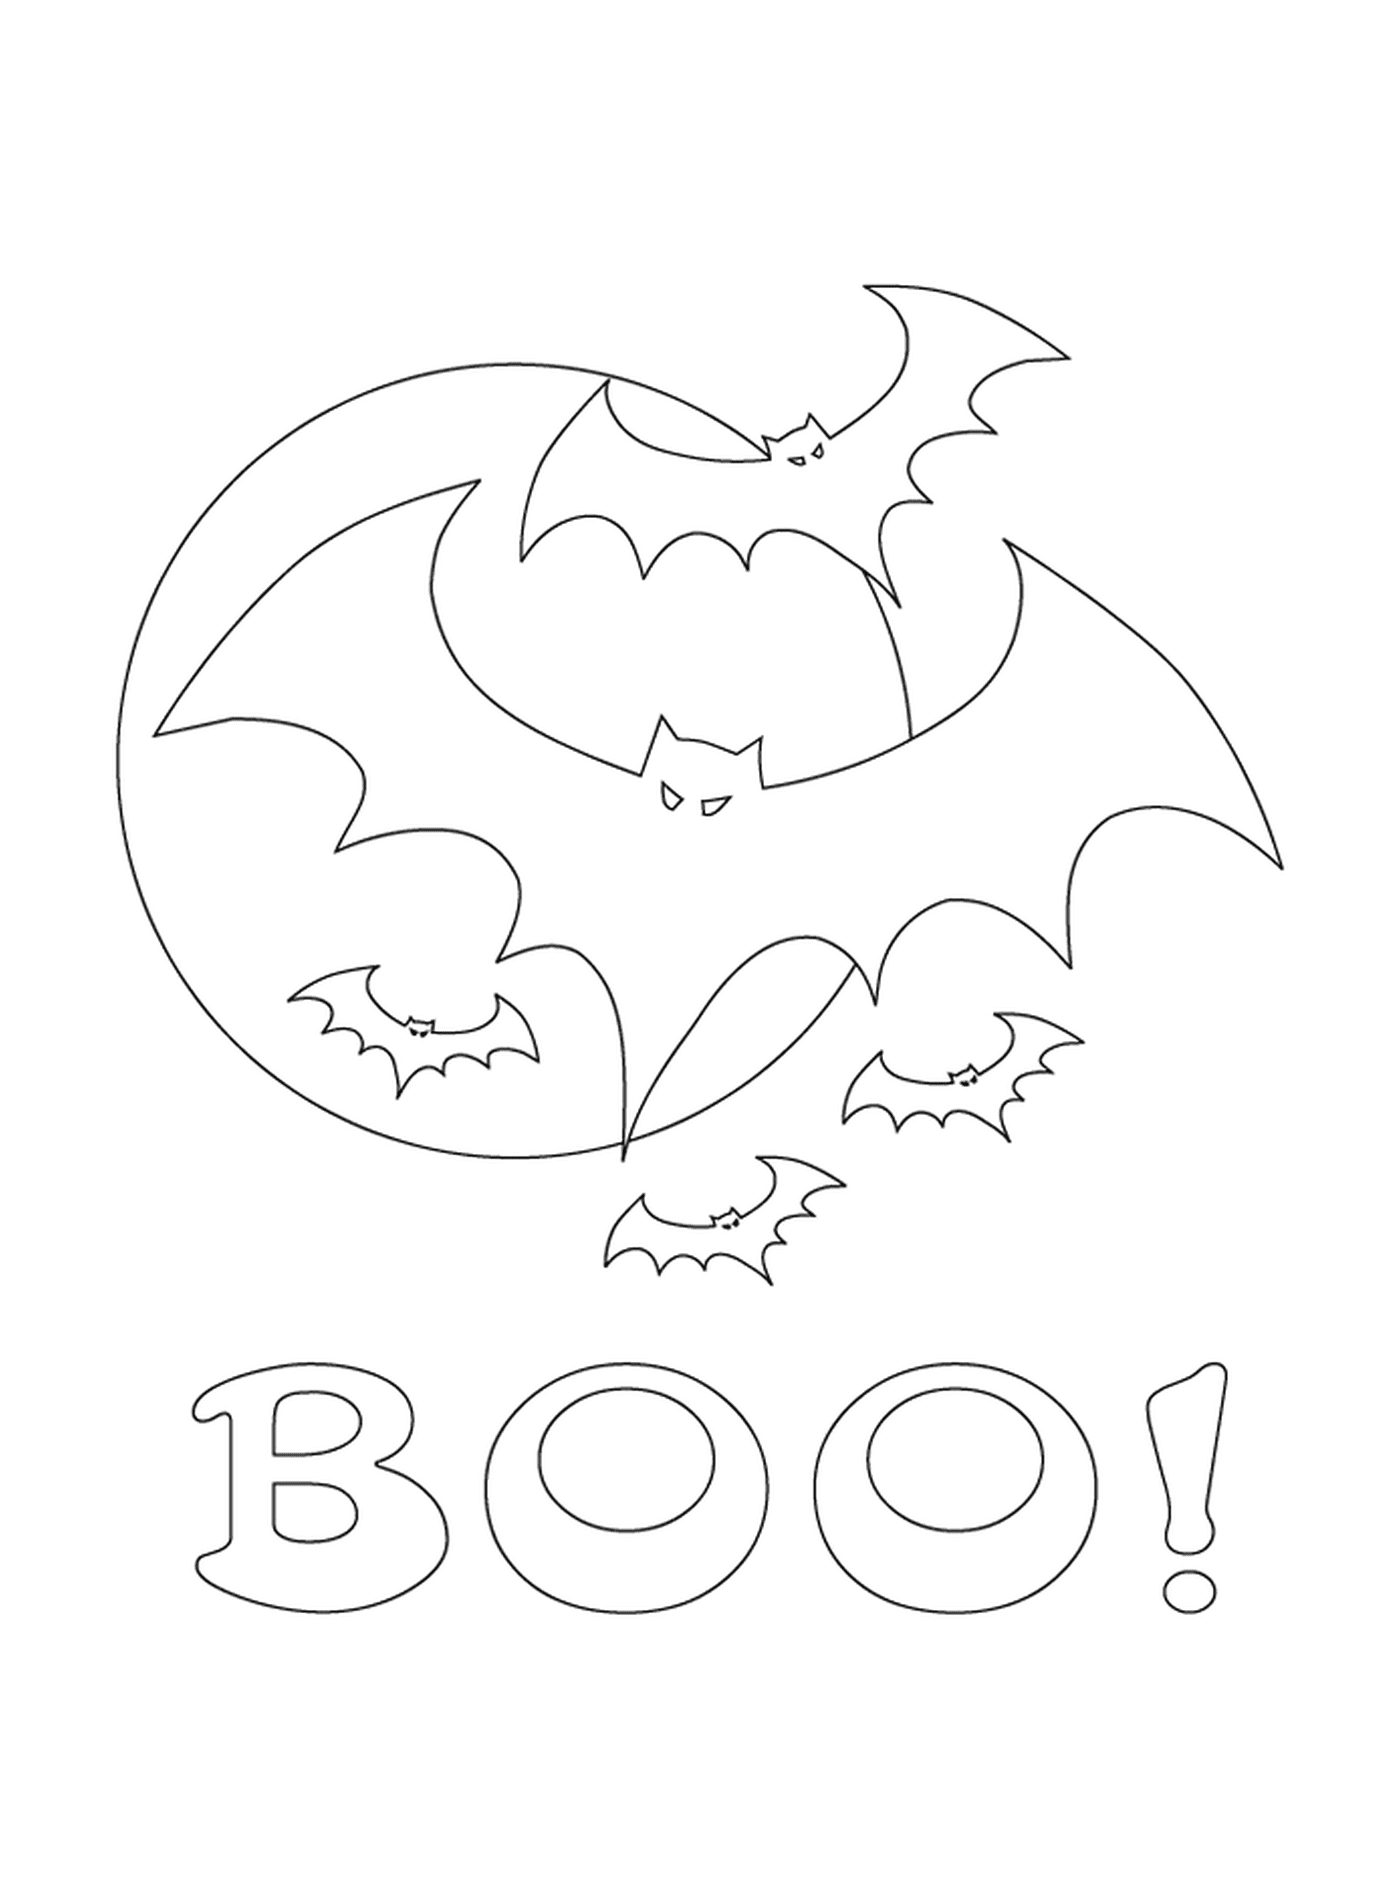  bat and the word Boo 